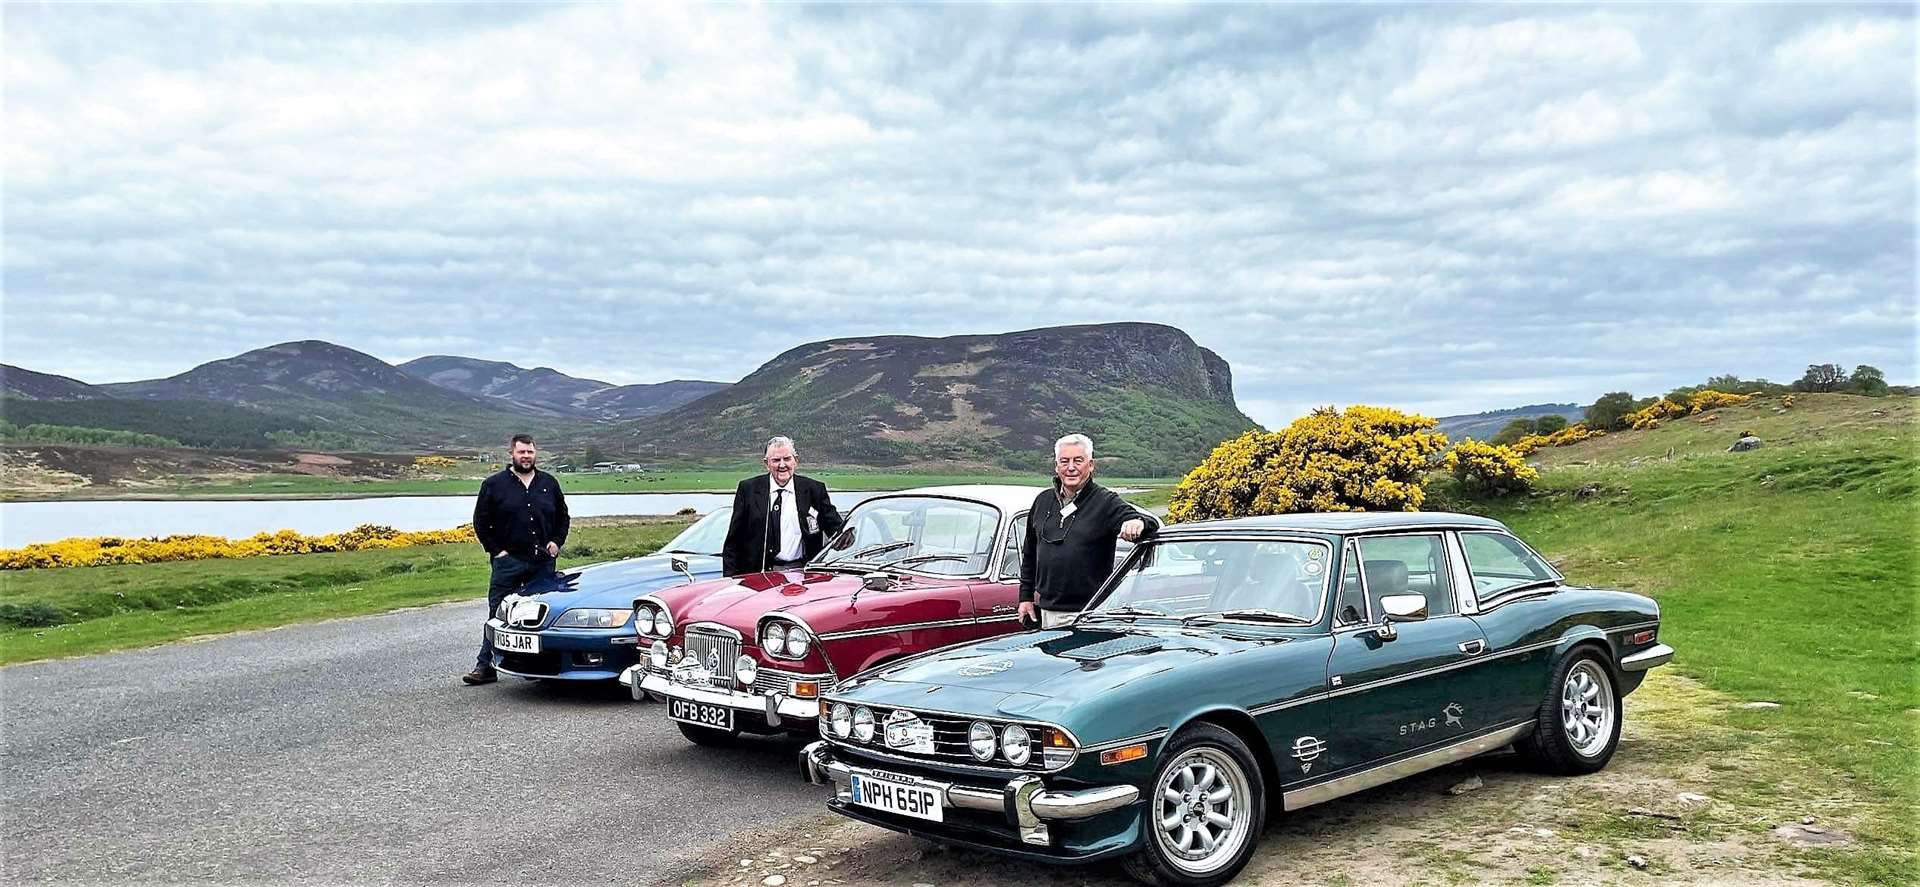 Members of the Caithness and Sutherland Vintage and Classic Vehicle Club who attended the event. From left, James Green beside his 1999 BMW Z3, Bert Macleod with a 1963 Humber Sceptre and Les Bremner next to his 1976 Monarch Triumph Stag.